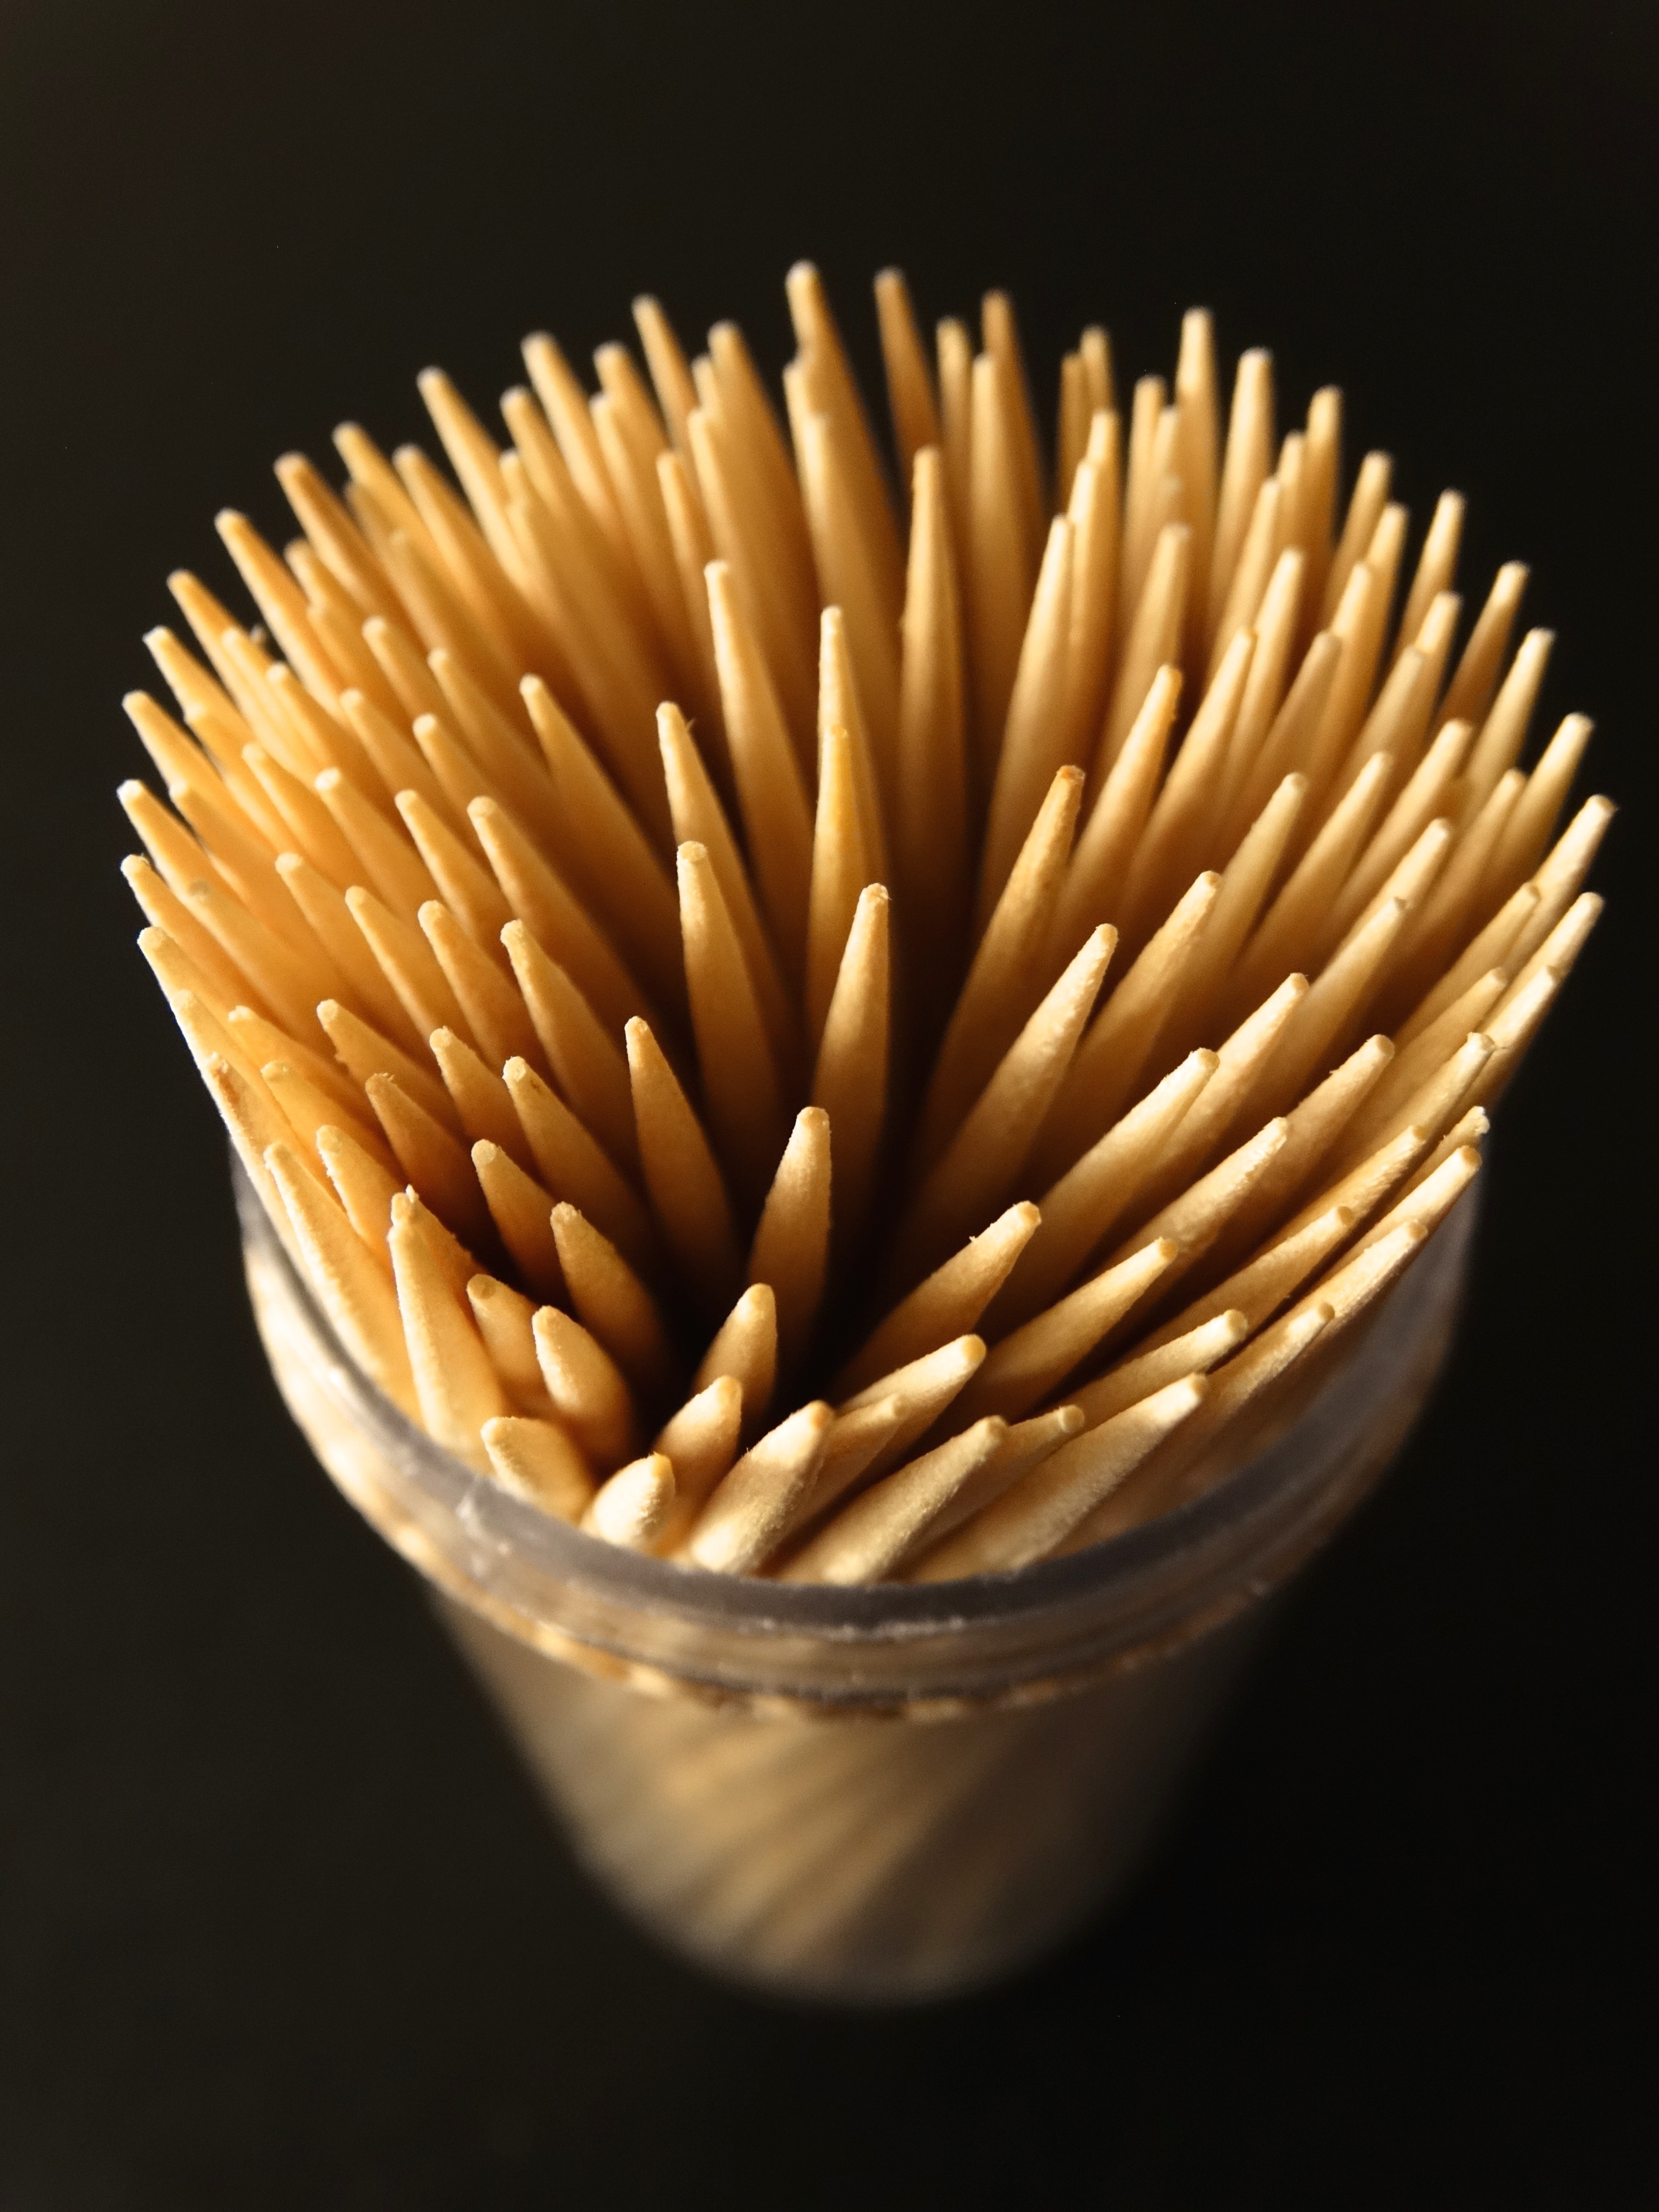 Pointed, Prickly, Toothpick, food and drink, italian food